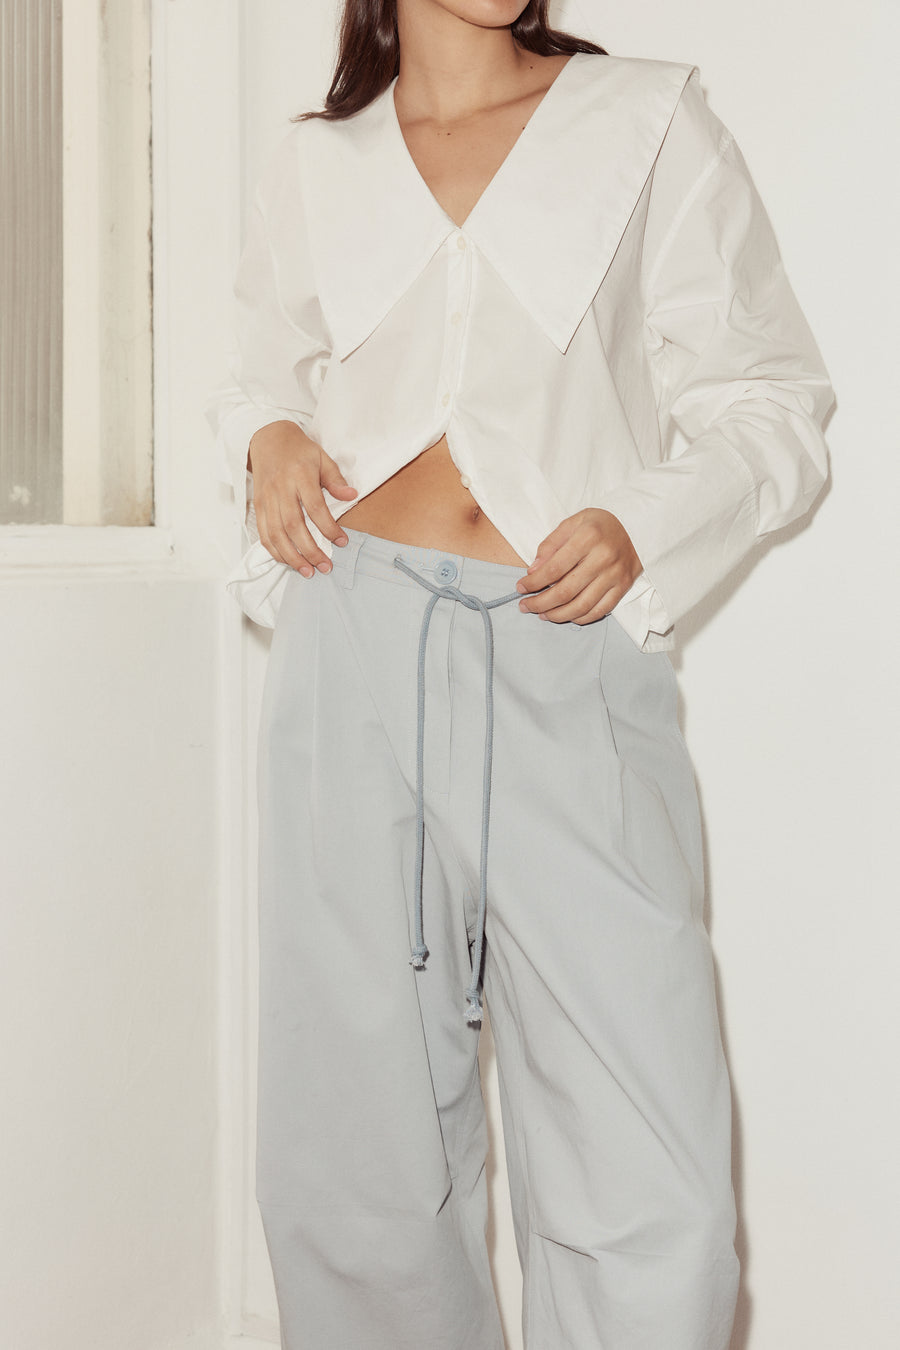 close up shot of female model wearing Deiji Studios sky blue cotton twill pants, features a drawcord waist, belt loops, and button closure at waist. Model wears Deiji Studios white oversized collared shirt.